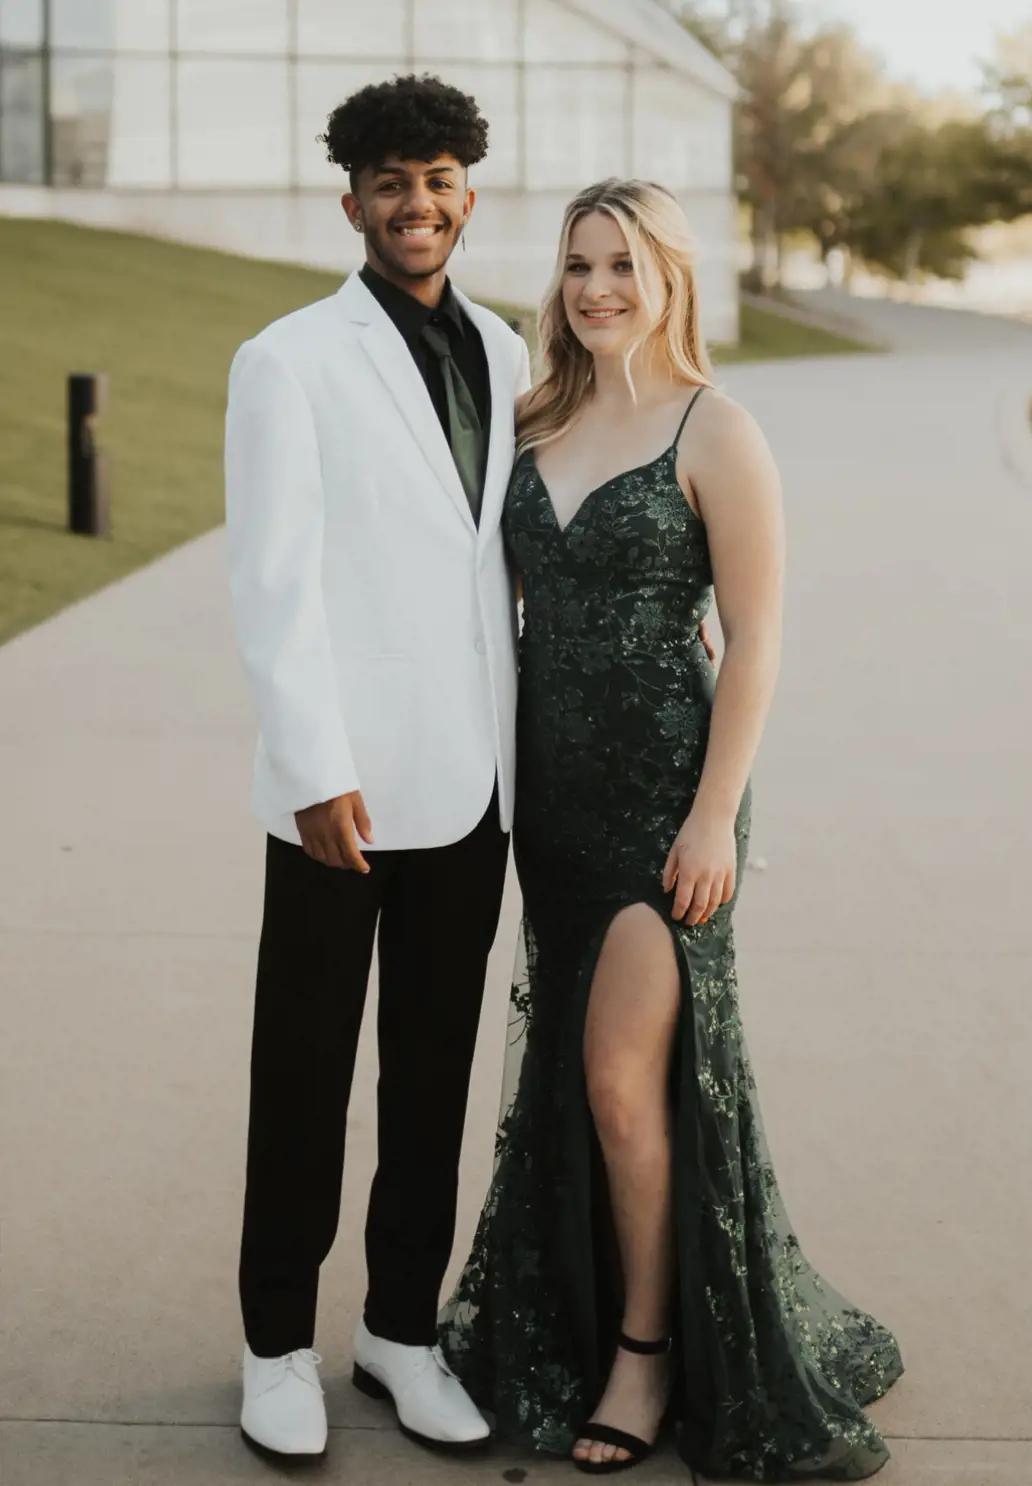 prom boy wearing a black suit and a prom girl wearing an emerald green gown